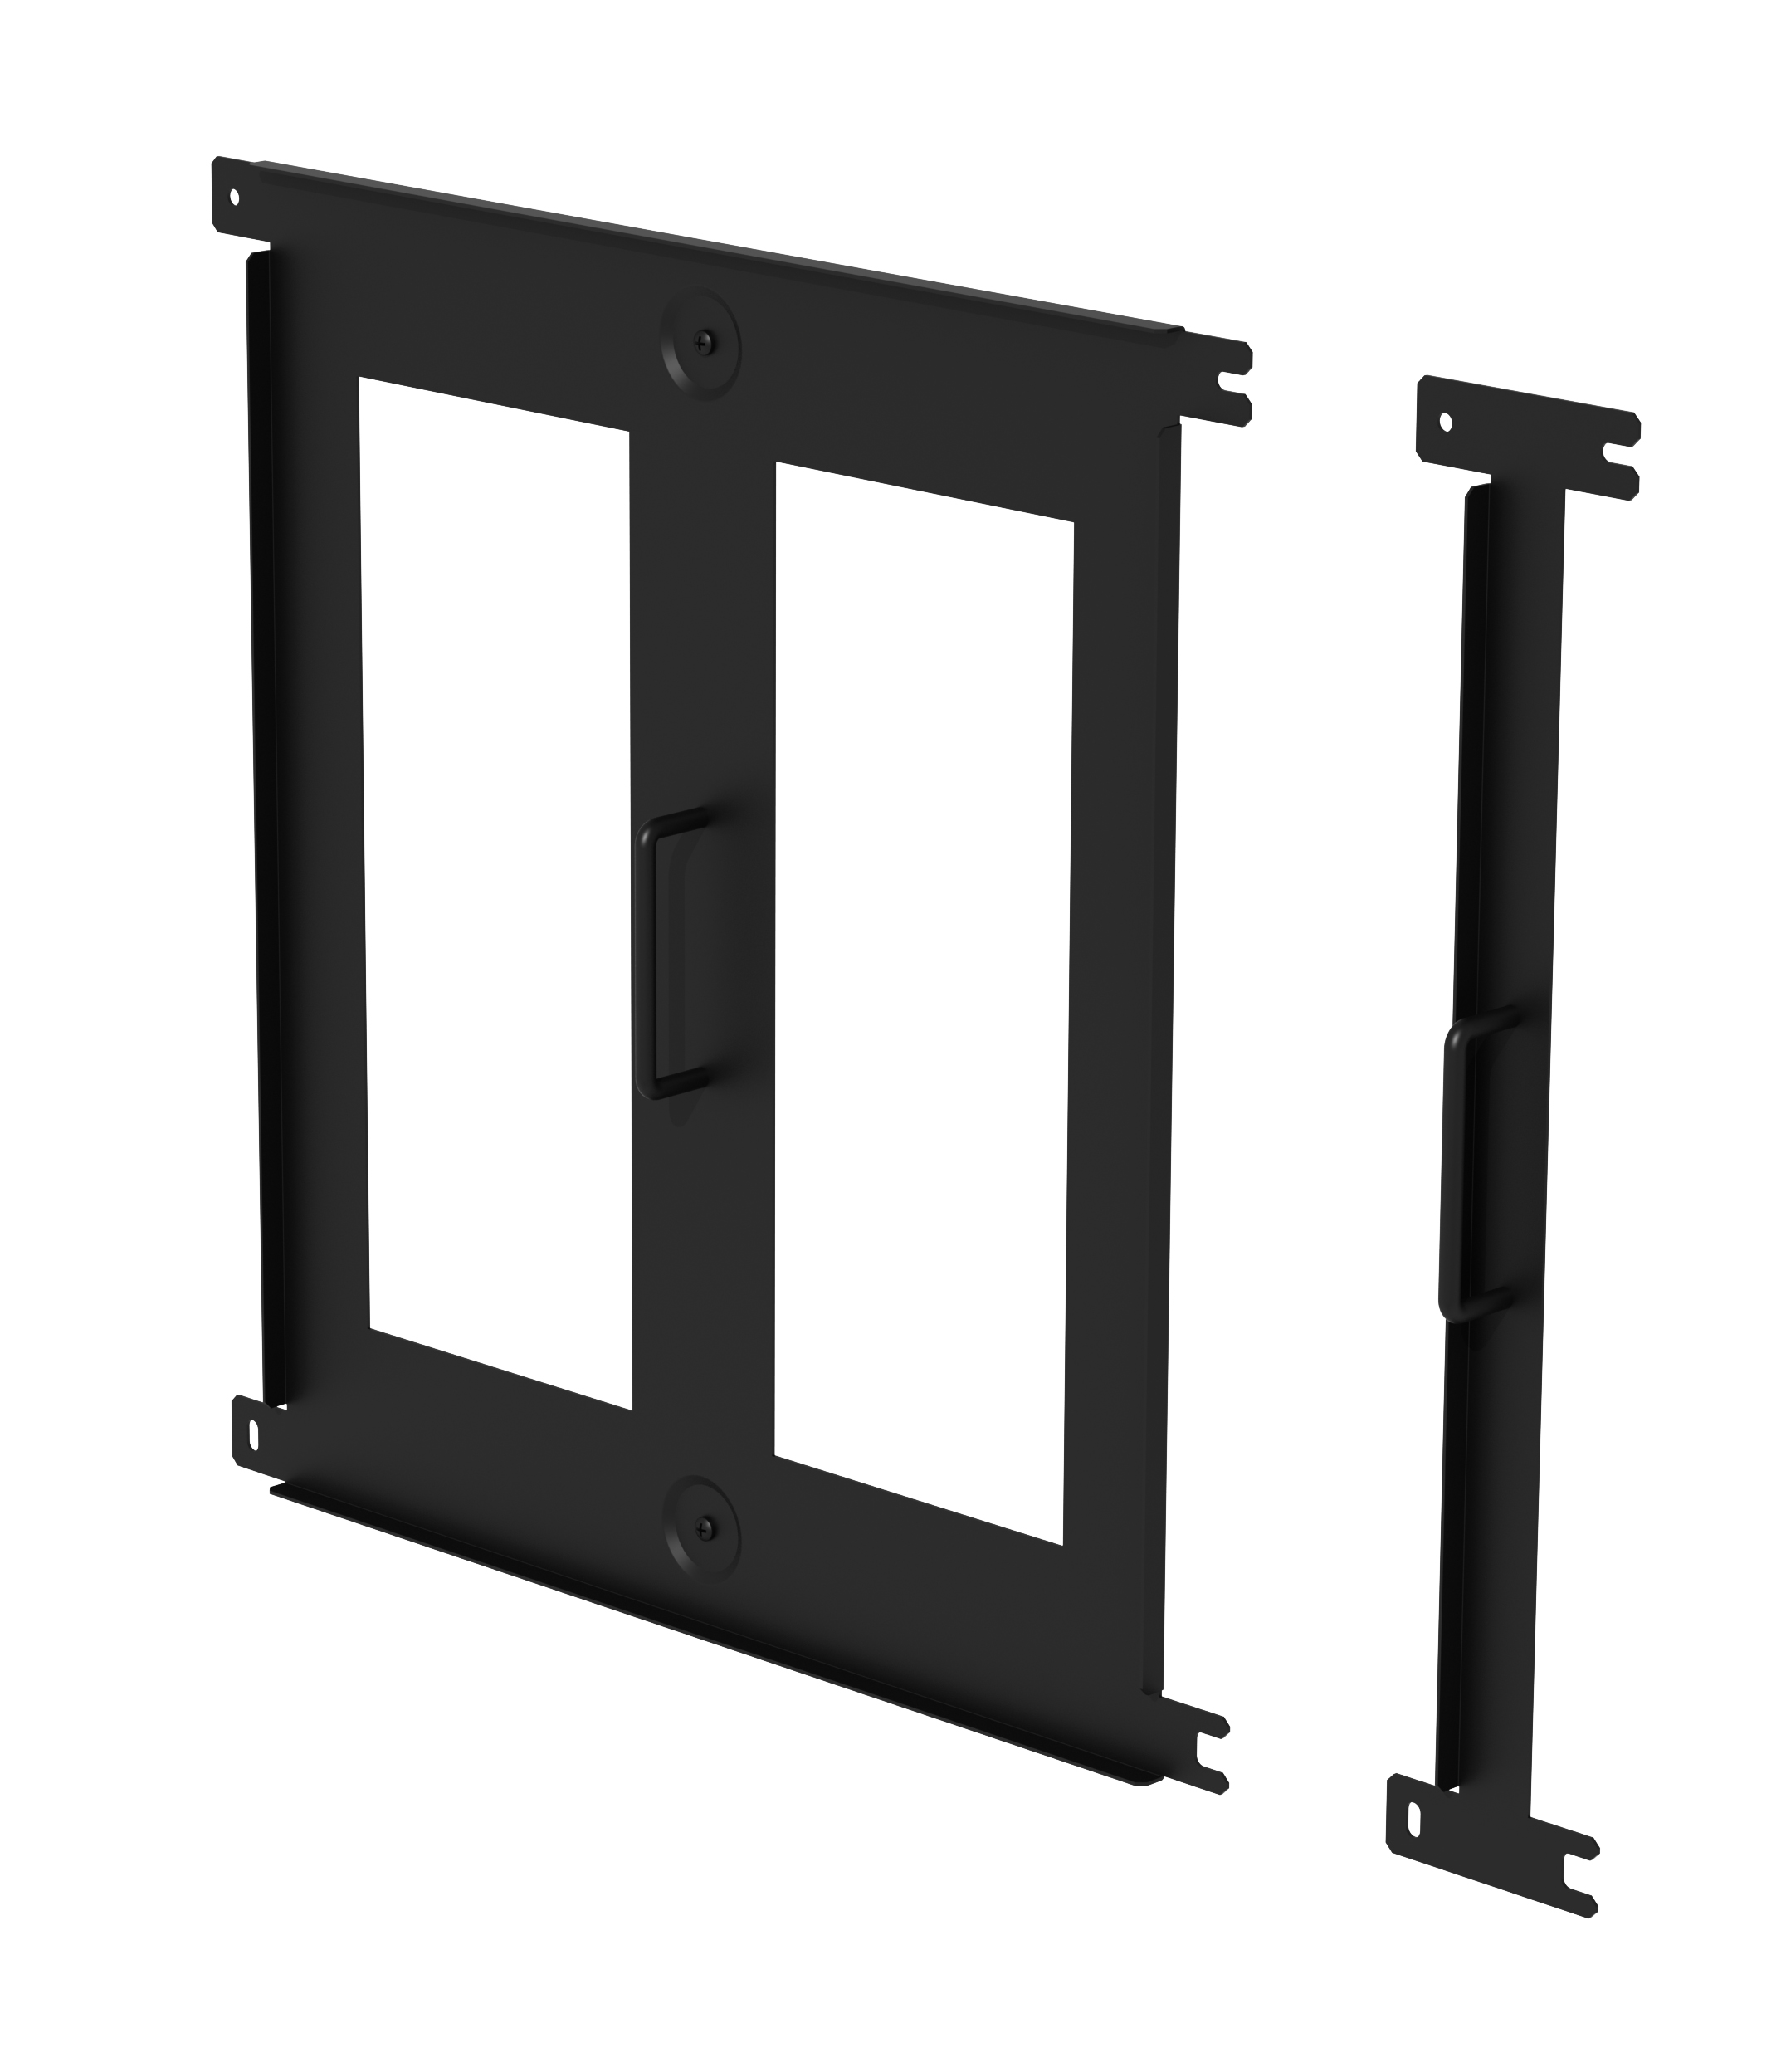 DS-VWRS092 Reusable Video Wall Spacer